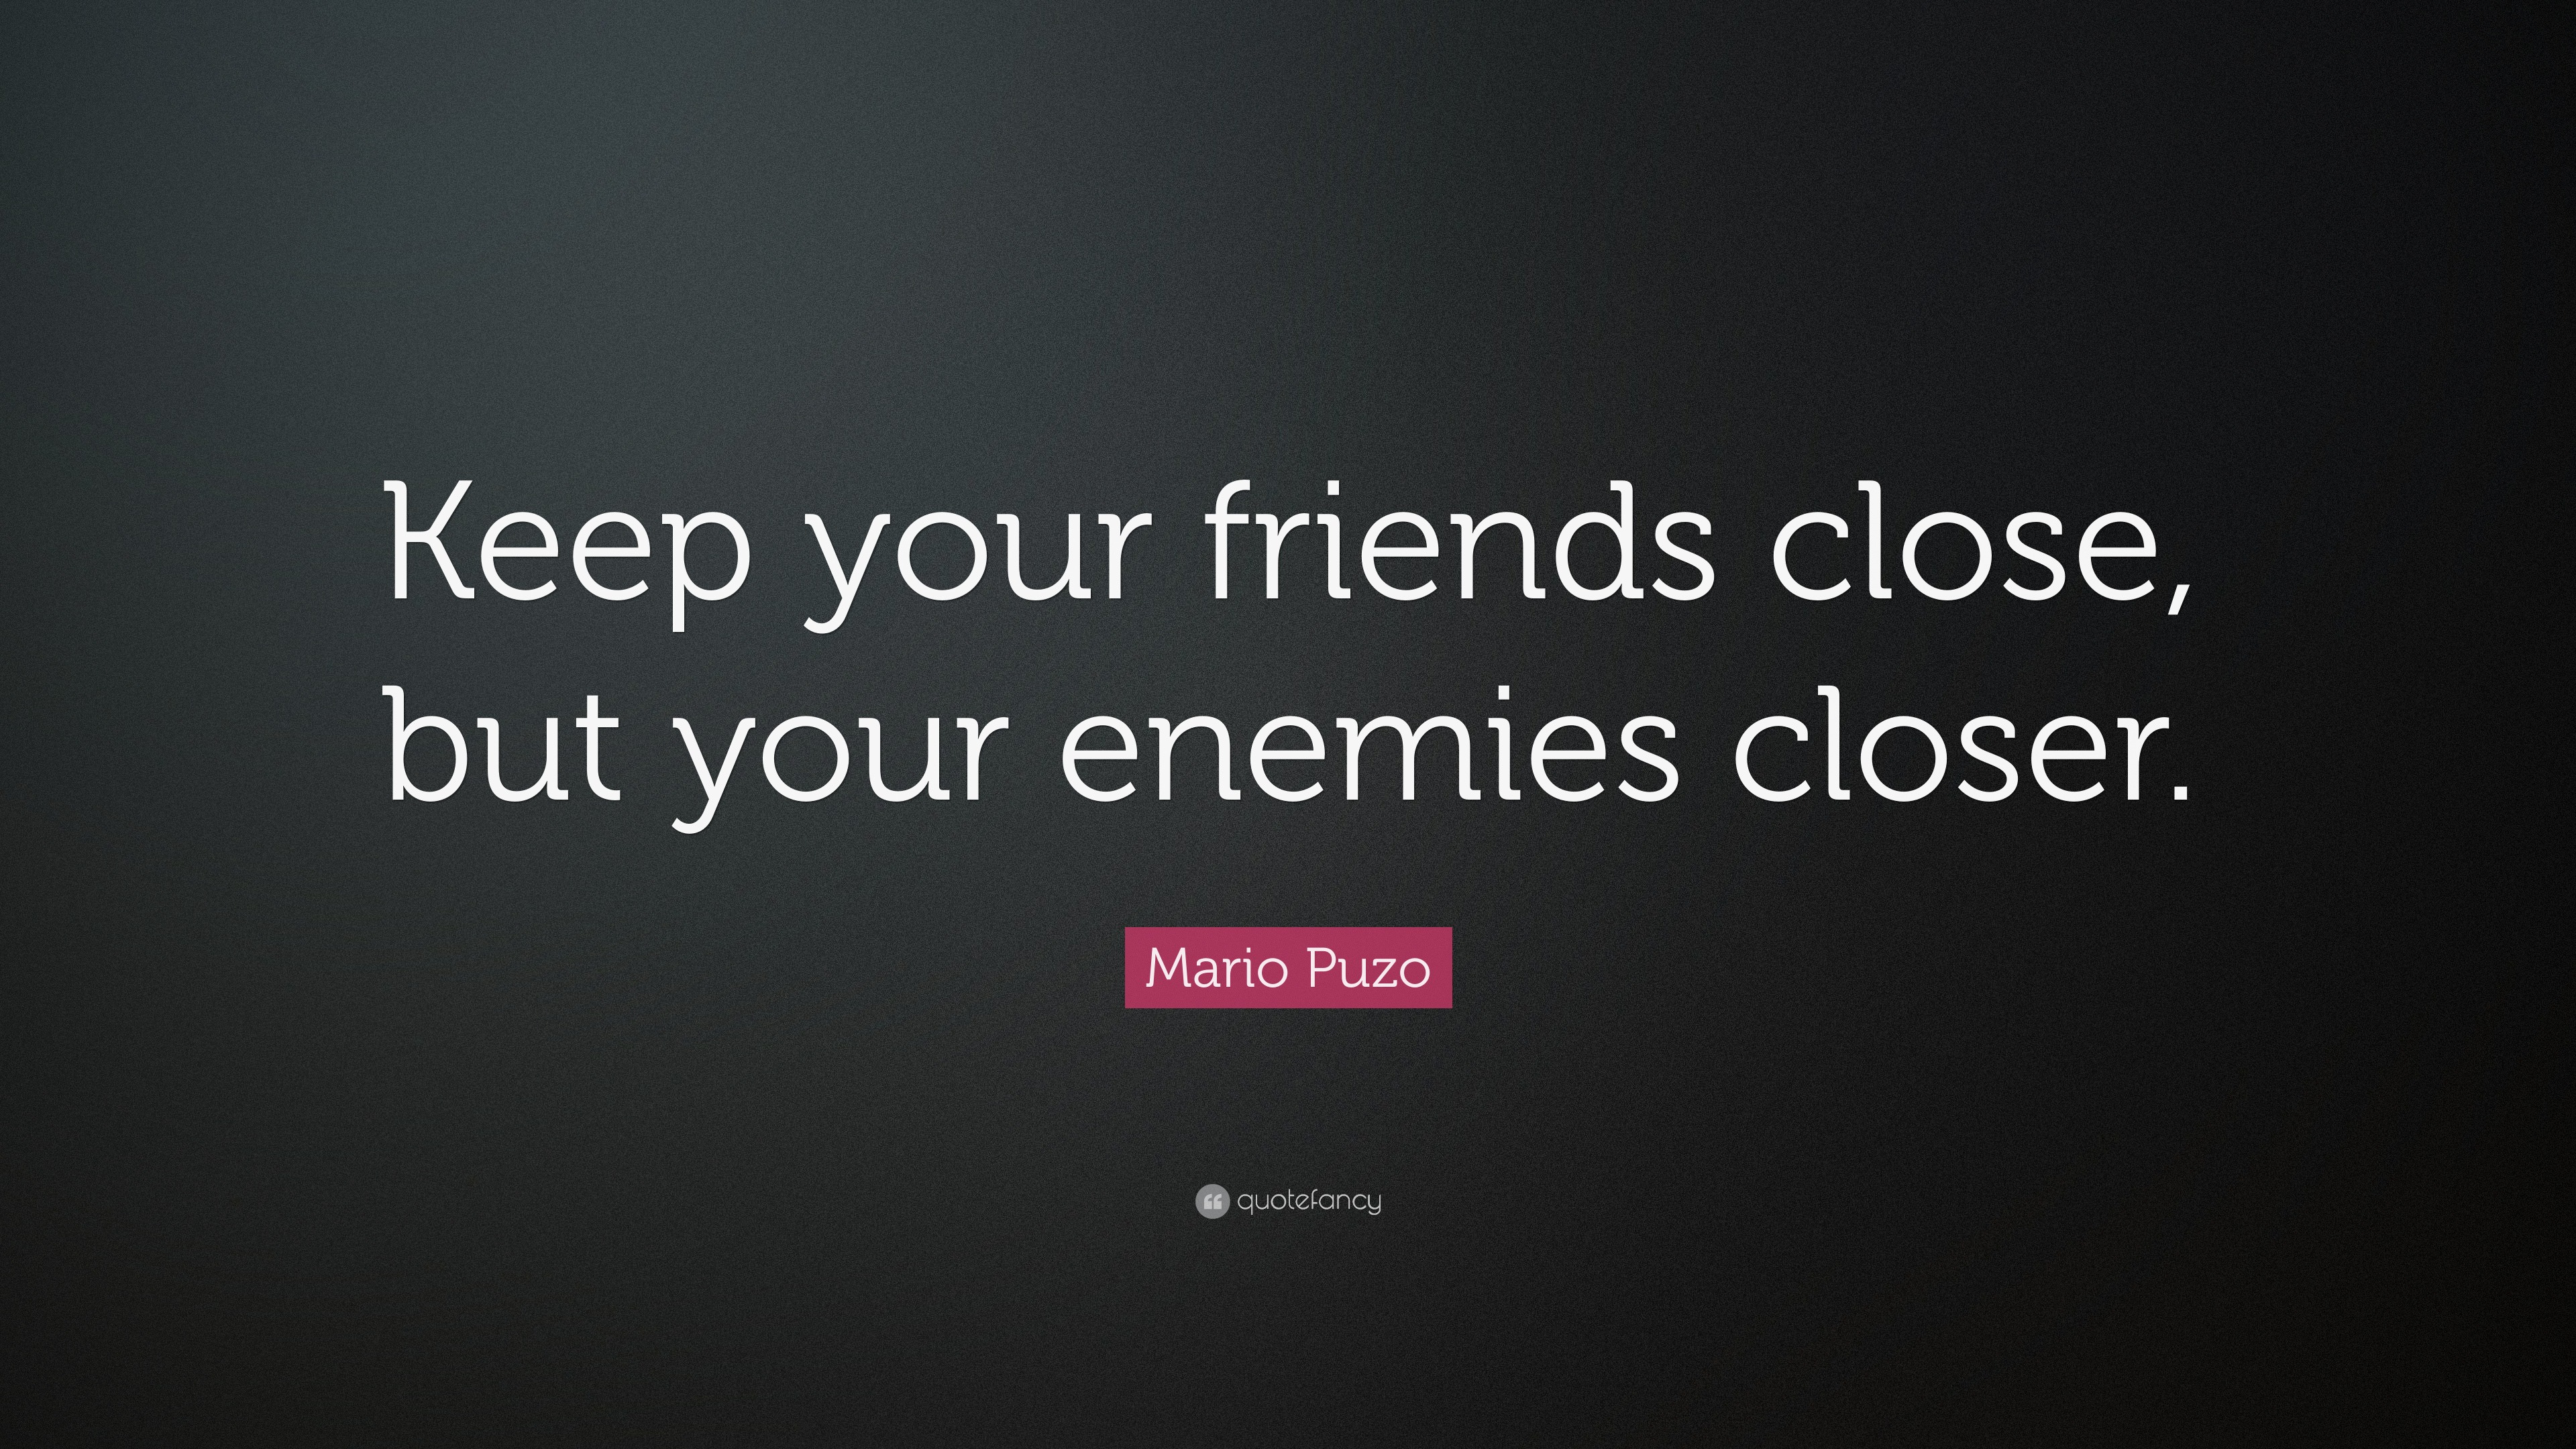 saying keep your enemies closer